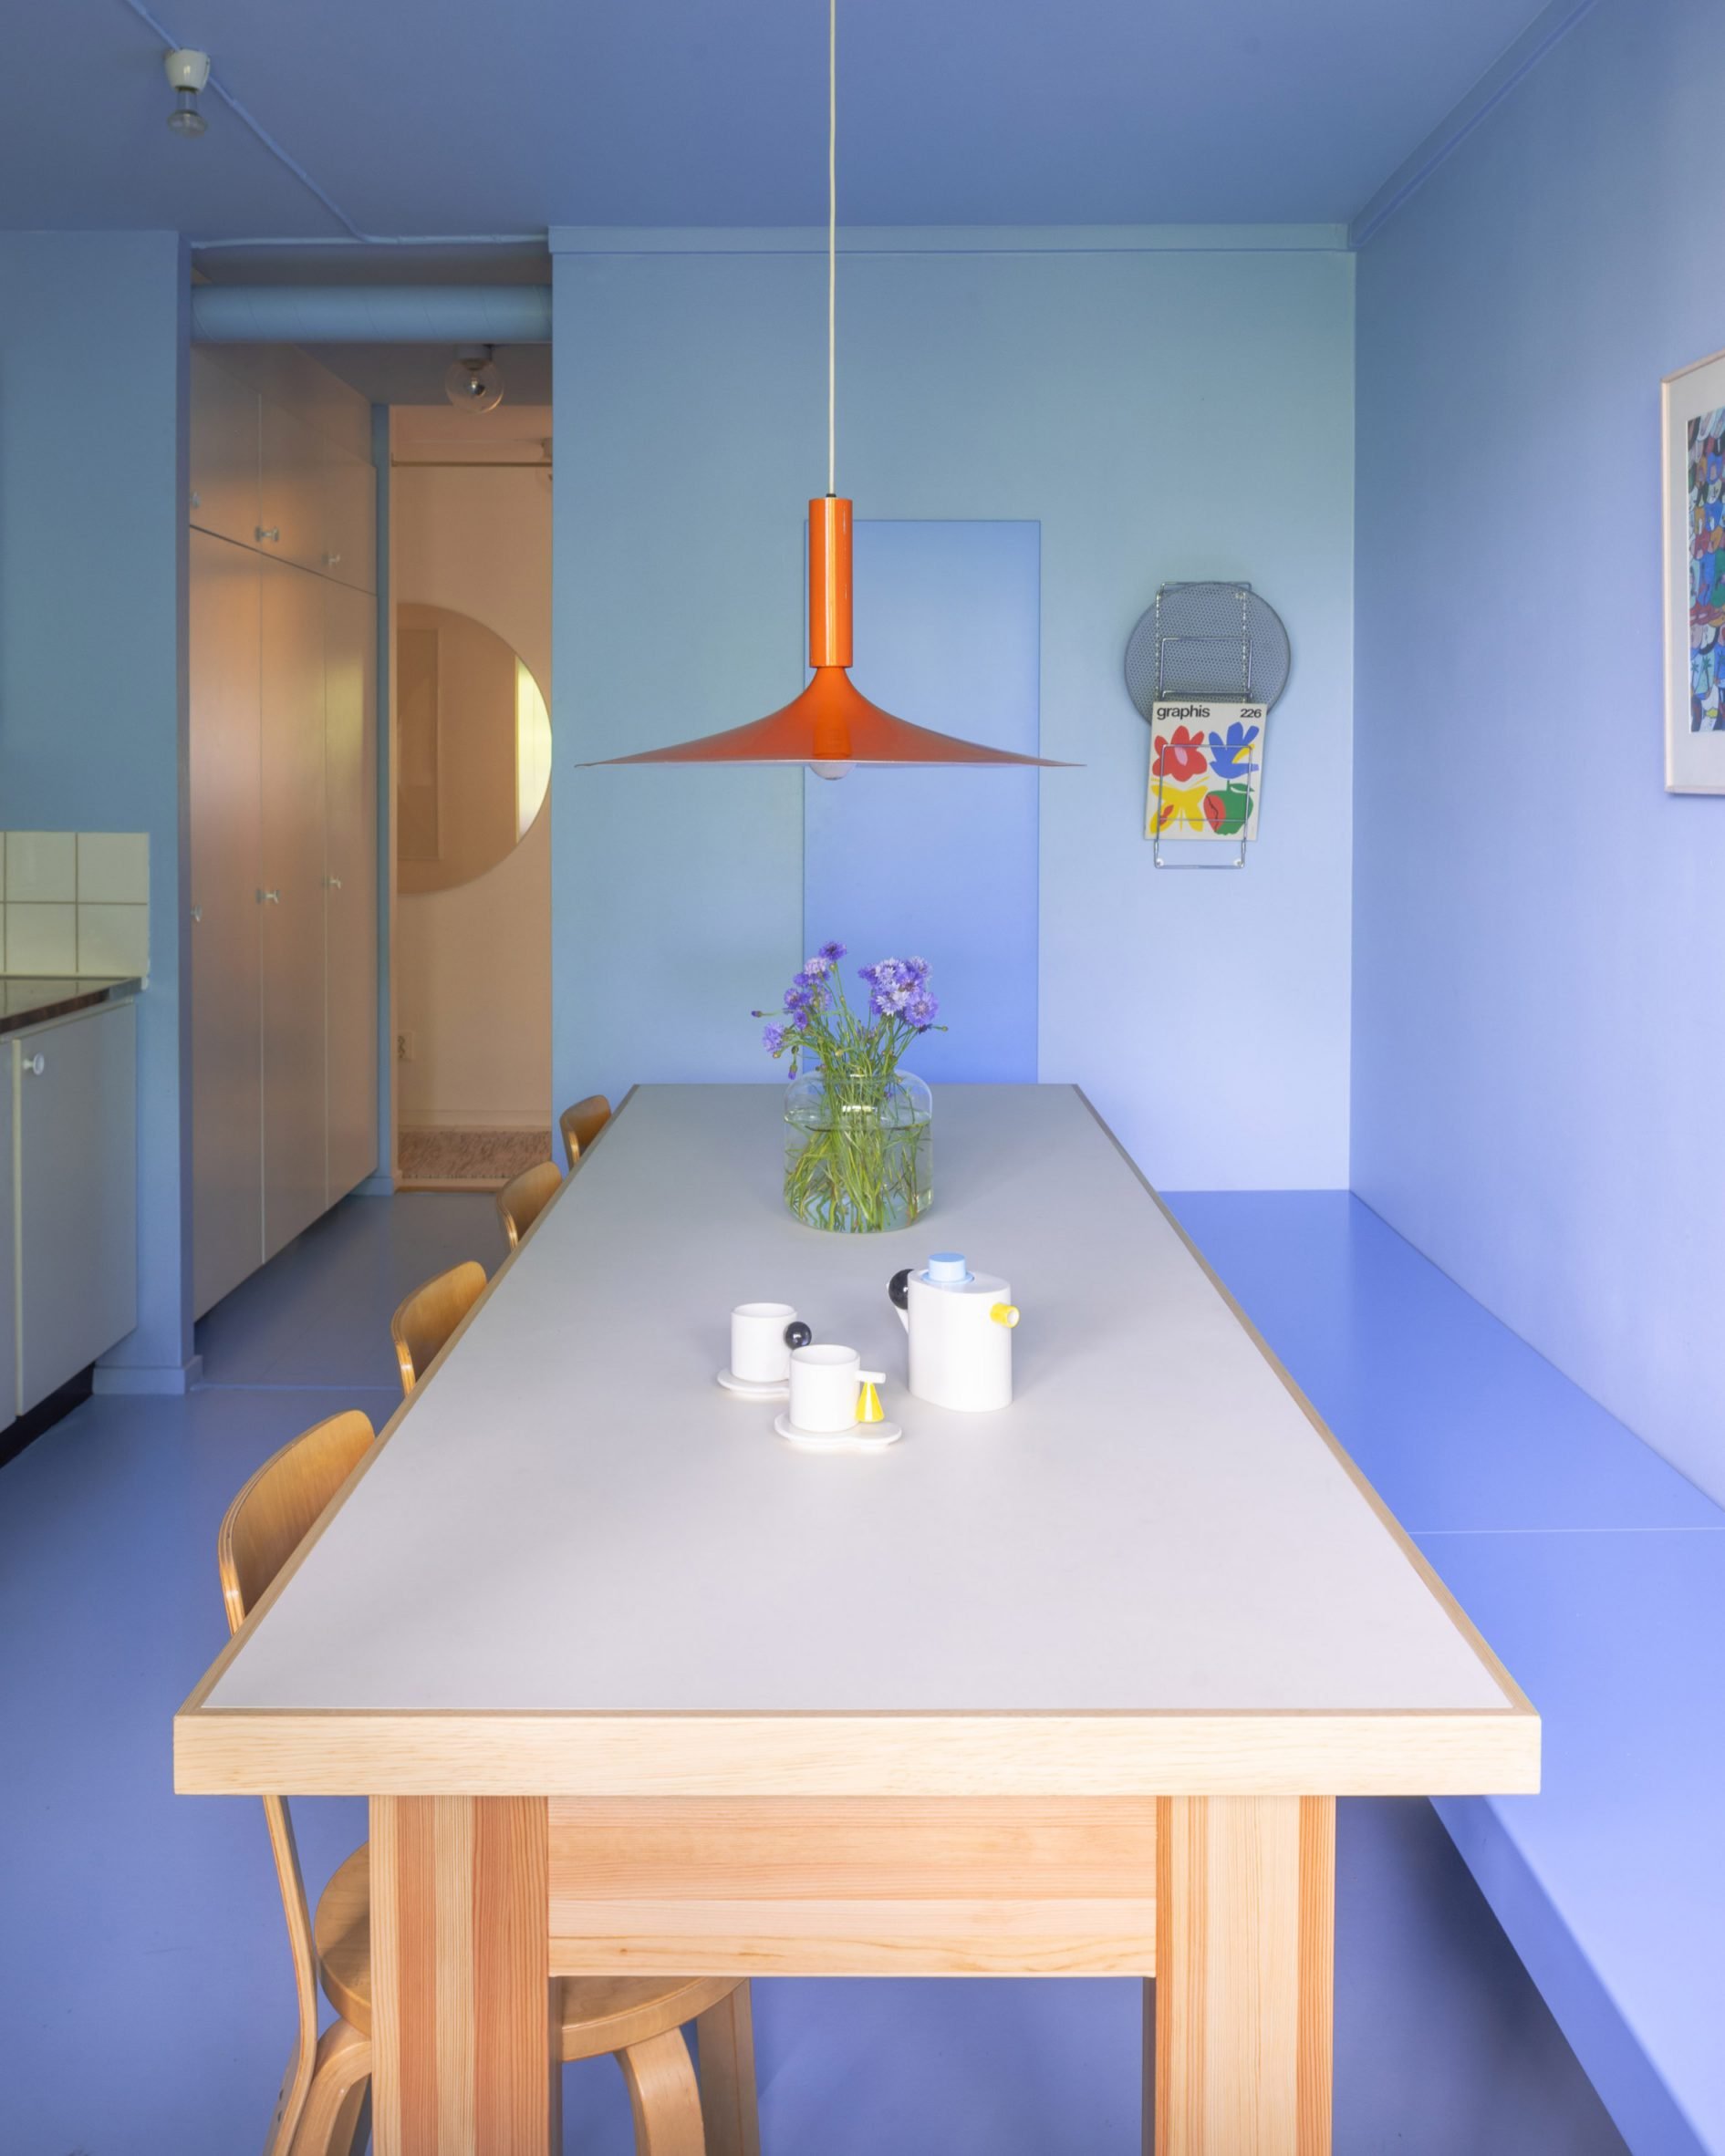 All-lilac kitchen with geometric seating and a bright orange pendant lamp above the dining table